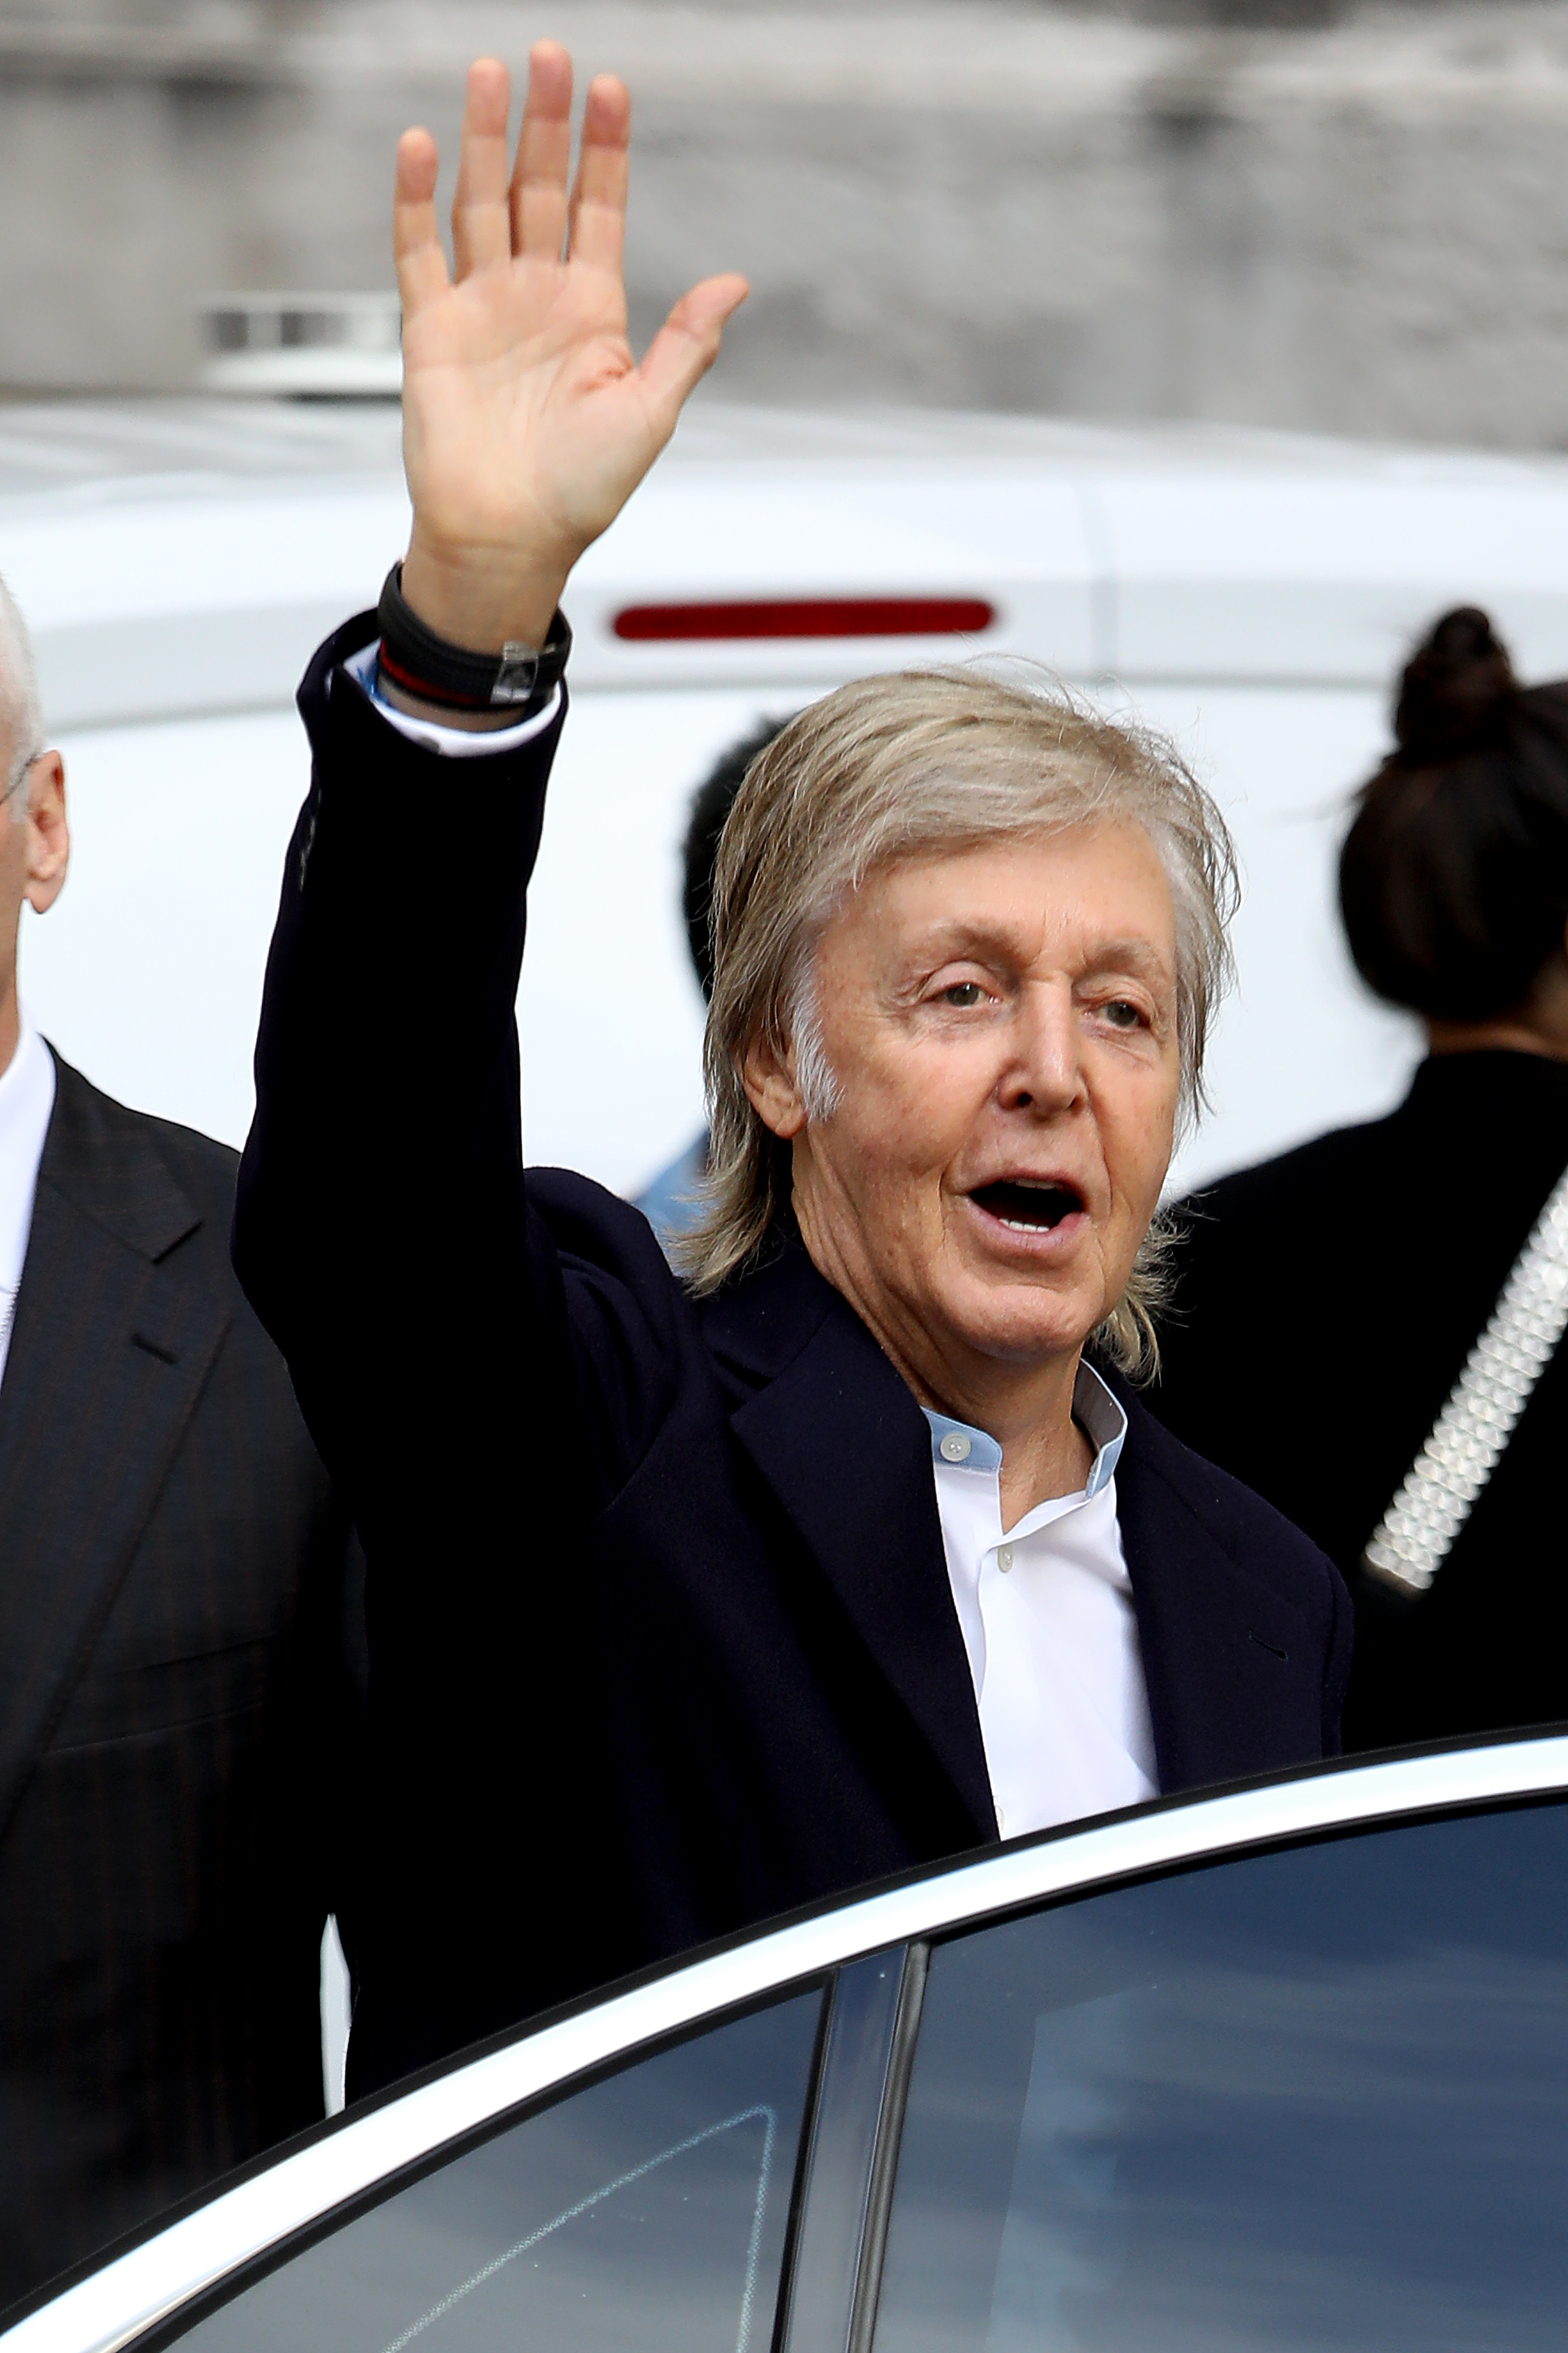 Paul McCartney at the Stella McCartney Womenswear Spring/Summer 2020 show as part of Paris Fashion Week in Paris, France, on September 30, 2019. | Source: Getty Images